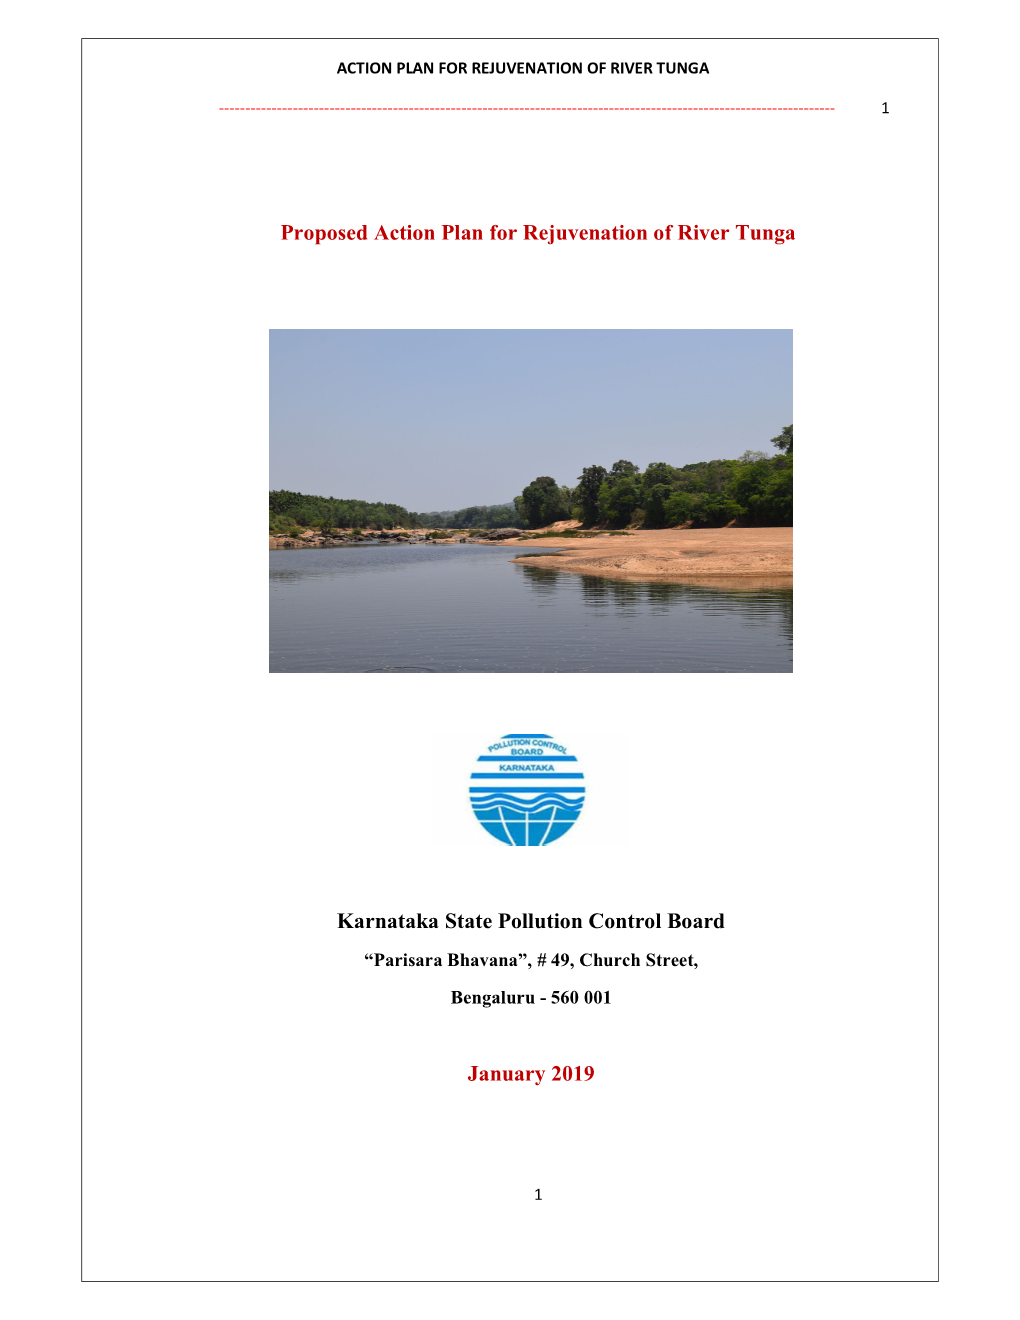 Proposed Action Plan for Rejuvenation of River Tunga Karnataka State Pollution Control Board January 2019